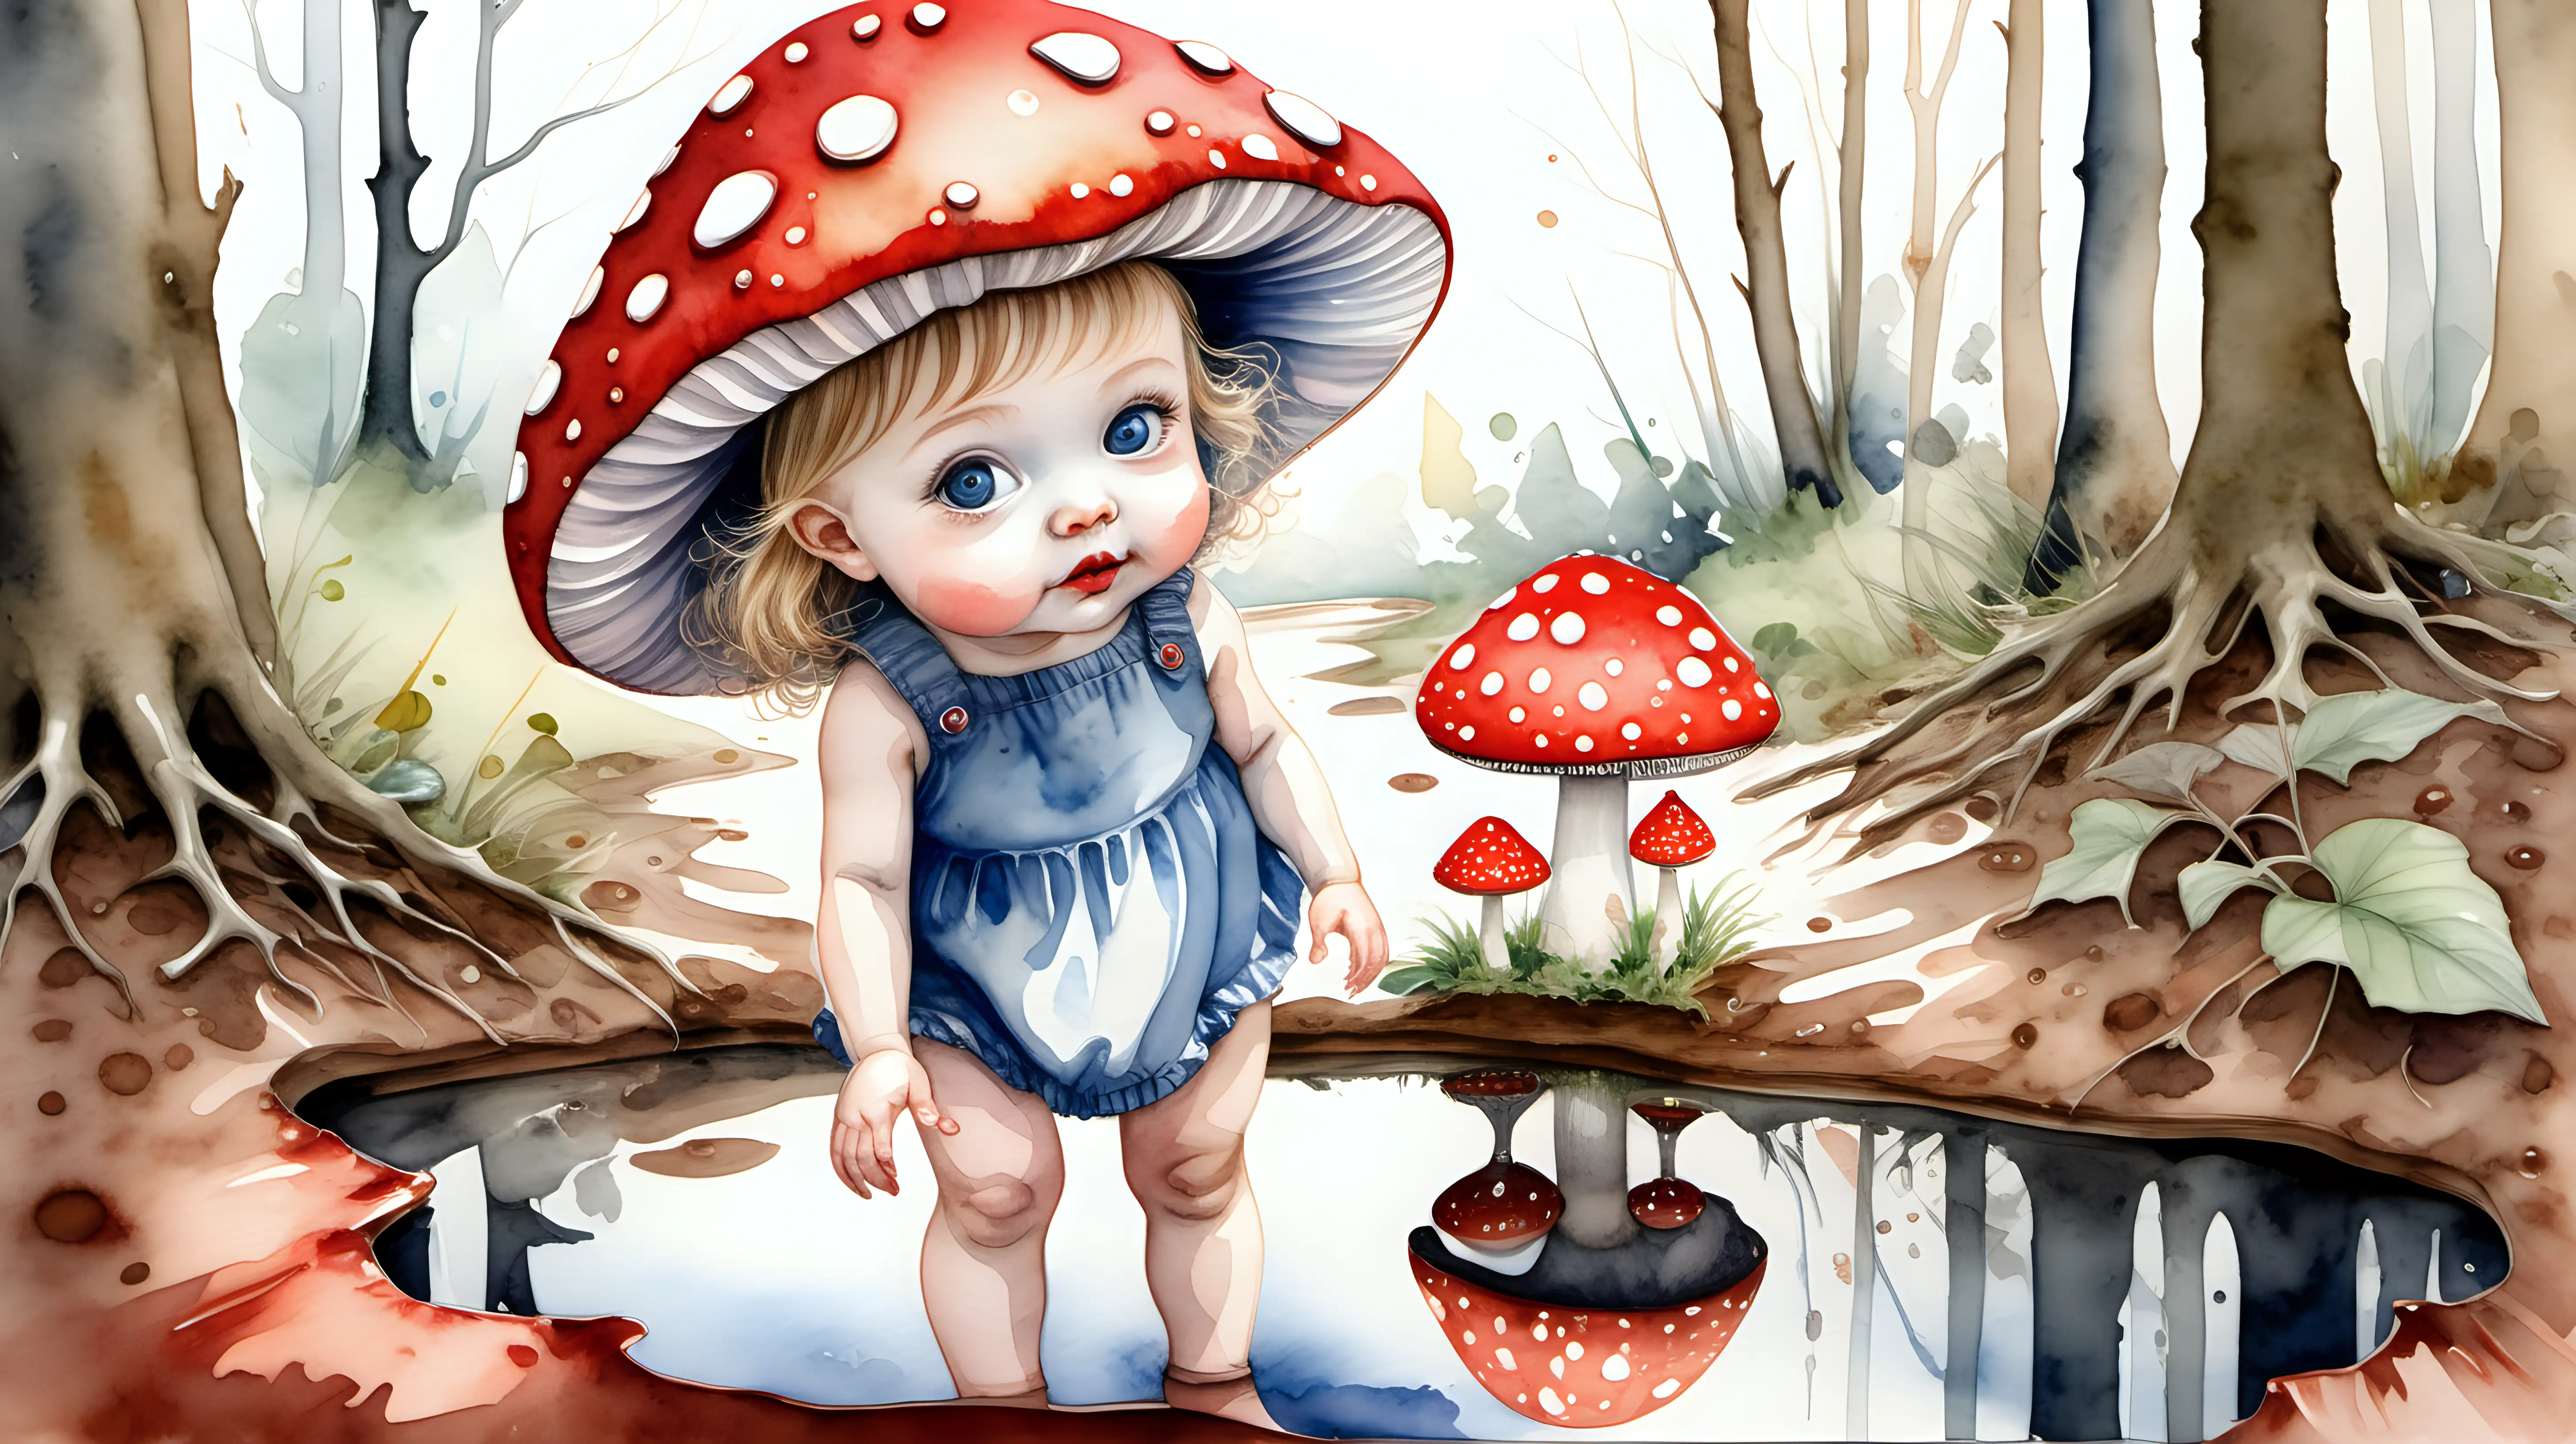 A watercolour fairytale picture of a darkblond blue eyed baby girl wears a hat made of a red toadstool, she is in a wood looking at her reflection in a puddle
